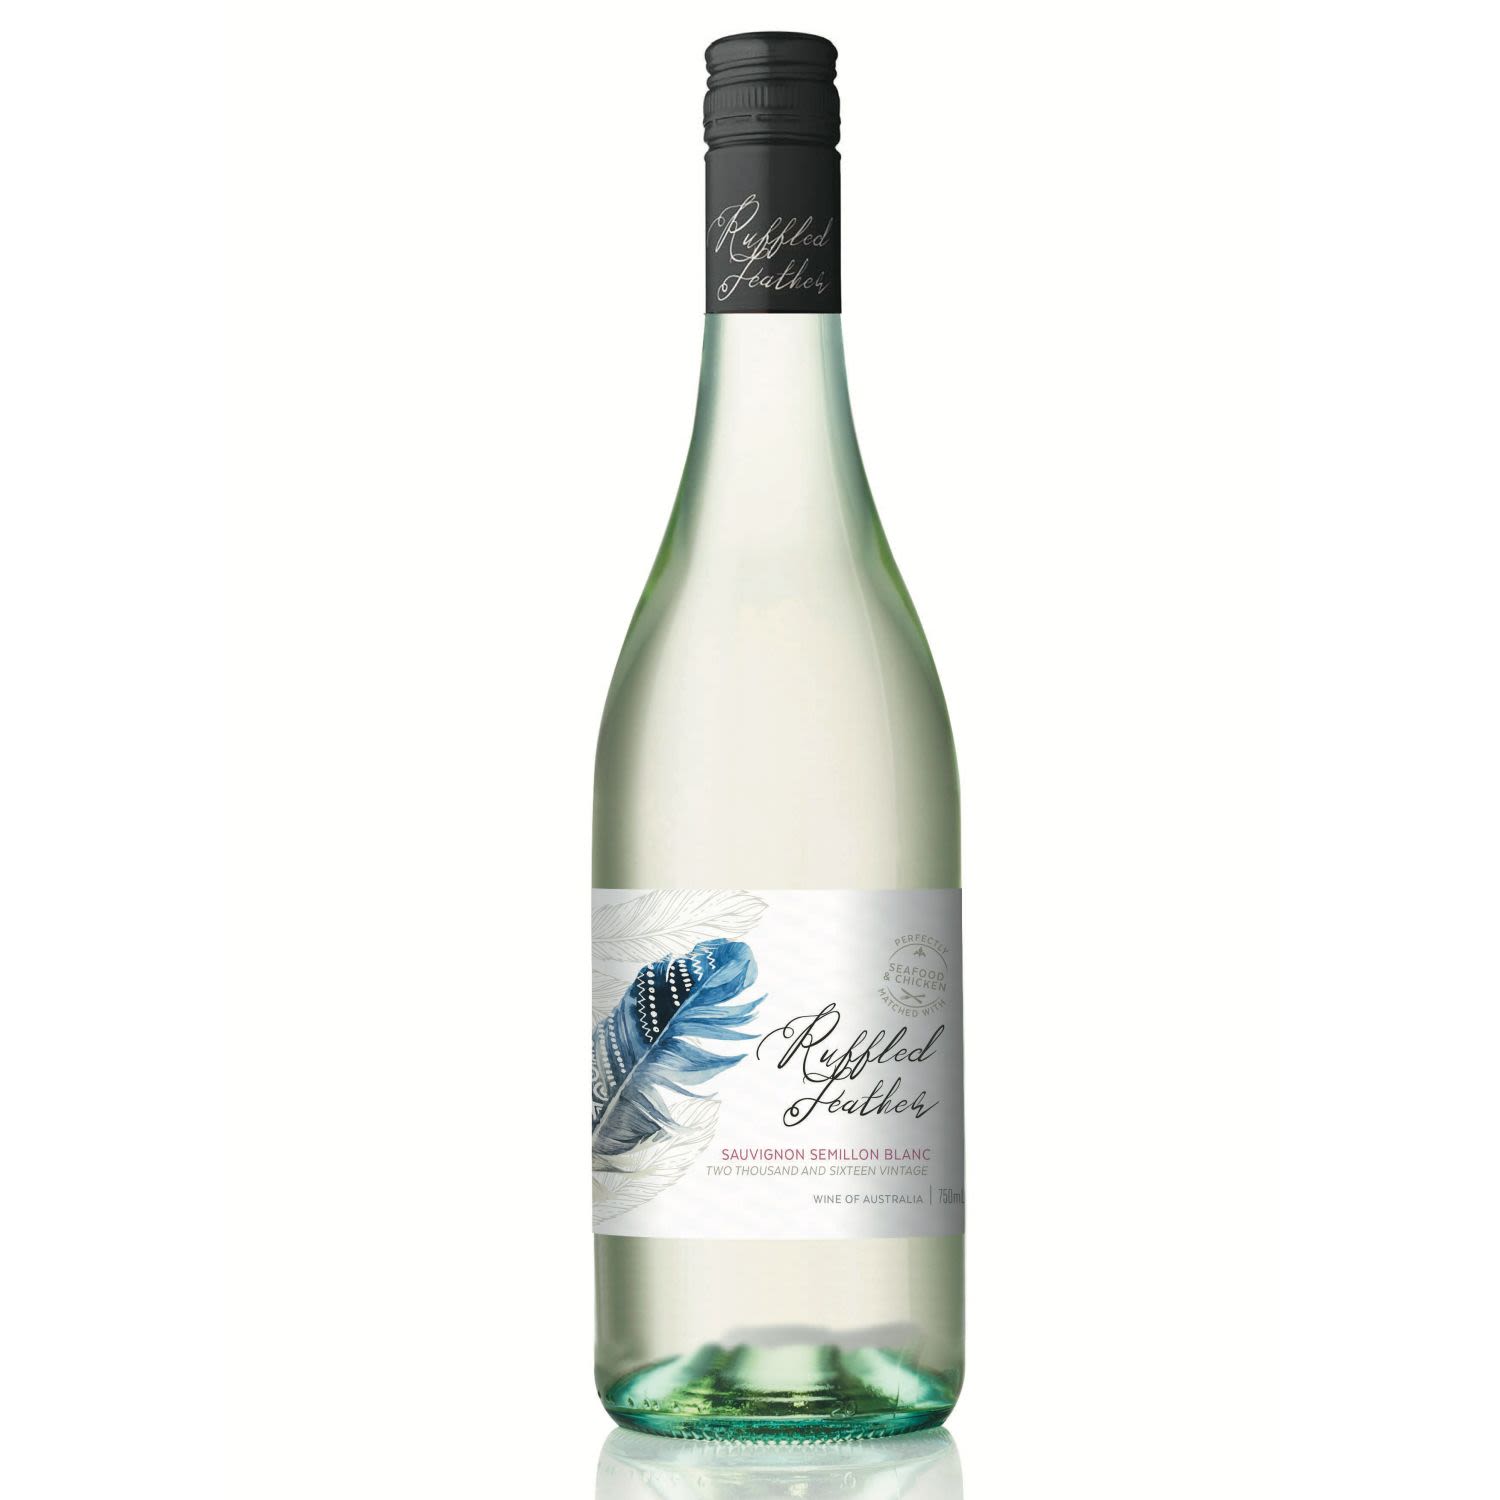 Semillon Sauvignon Blanc is a wine that originated in the Bordeaux region of France, however, Australian has adopted and continued to perfect the varietal. Ruffled Feather Semillon Sauvignon Blanc is a versatile wine that goes well with scallops, chicken satay and fish pie.<br /> <br />Alcohol Volume: 11.50%<br /><br />Pack Format: Bottle<br /><br />Standard Drinks: 6.8</br /><br />Pack Type: Bottle<br /><br />Country of Origin: Australia<br /><br />Region: South Eastern Australia<br /><br />Vintage: Vintages Vary<br />